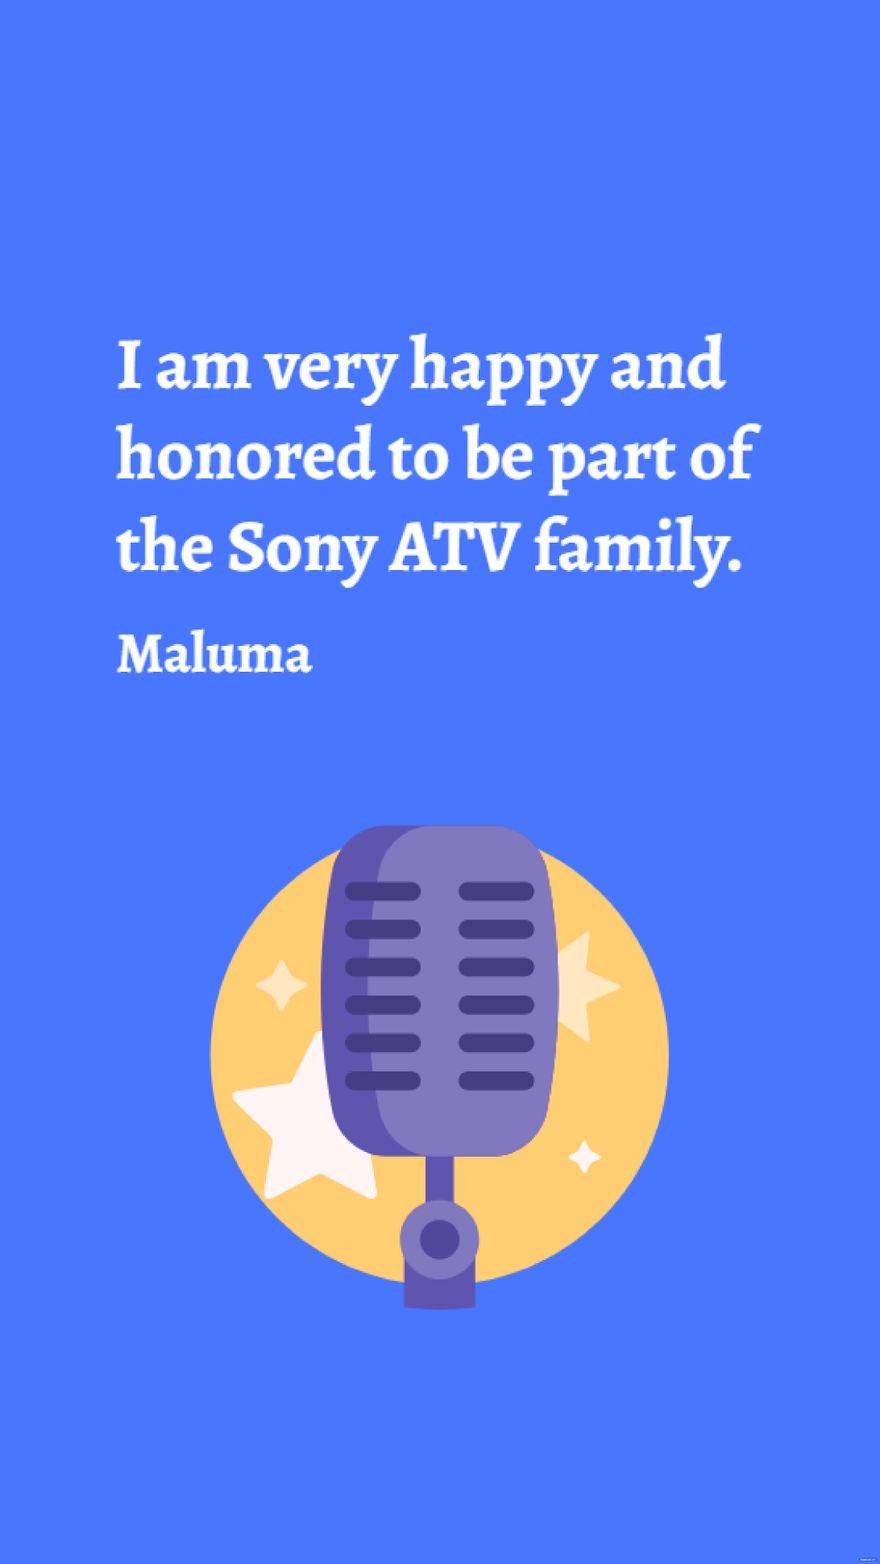 Free Maluma - I am very happy and honored to be part of the Sony ATV family. in JPG